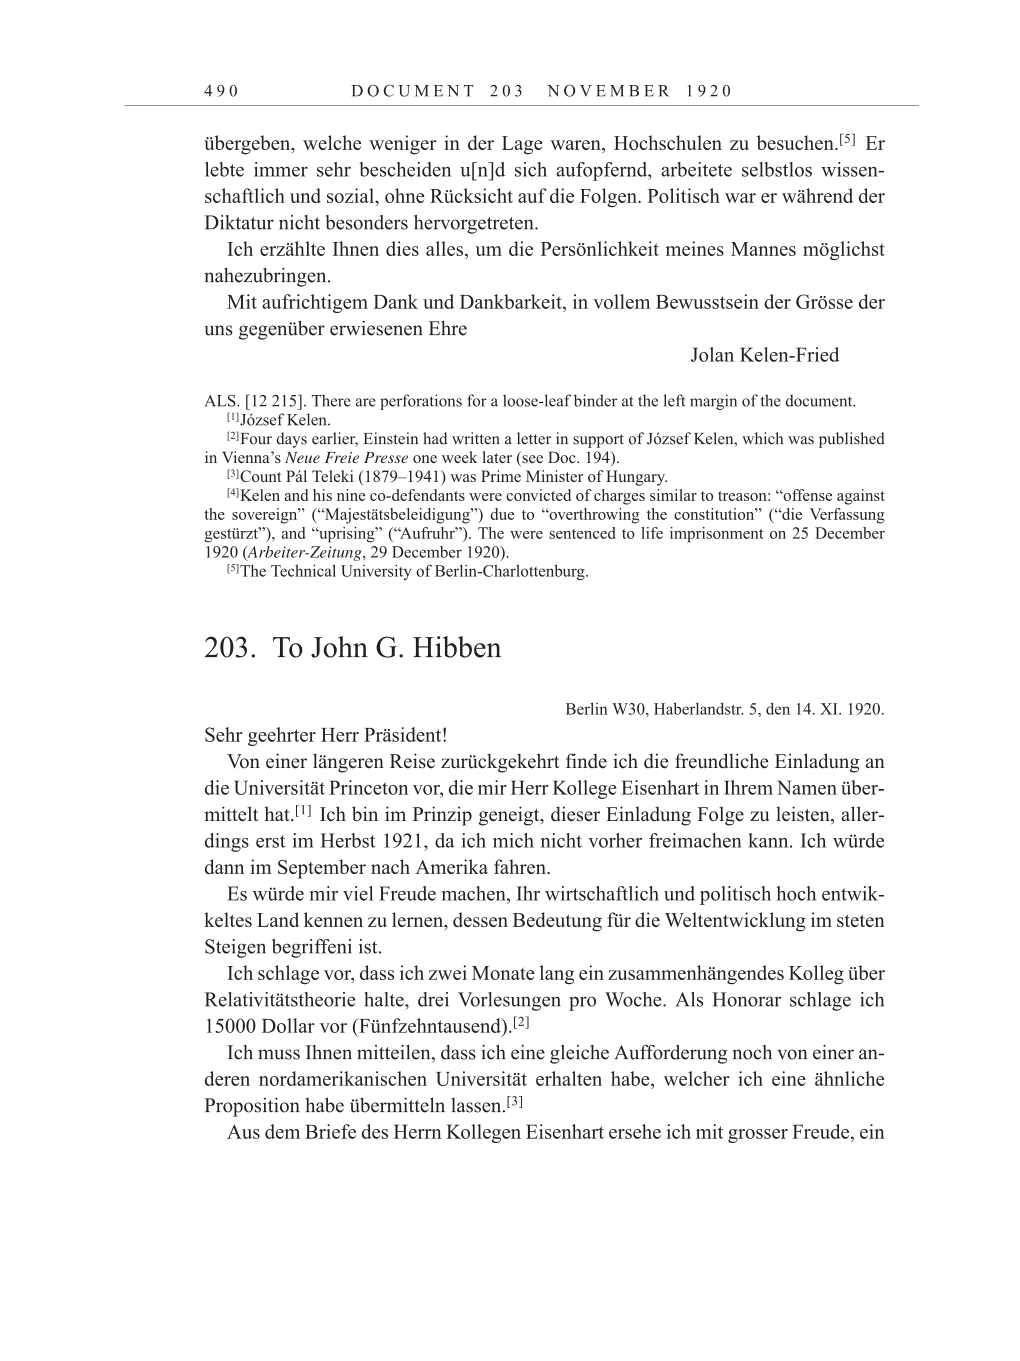 Volume 10: The Berlin Years: Correspondence May-December 1920 / Supplementary Correspondence 1909-1920 page 490